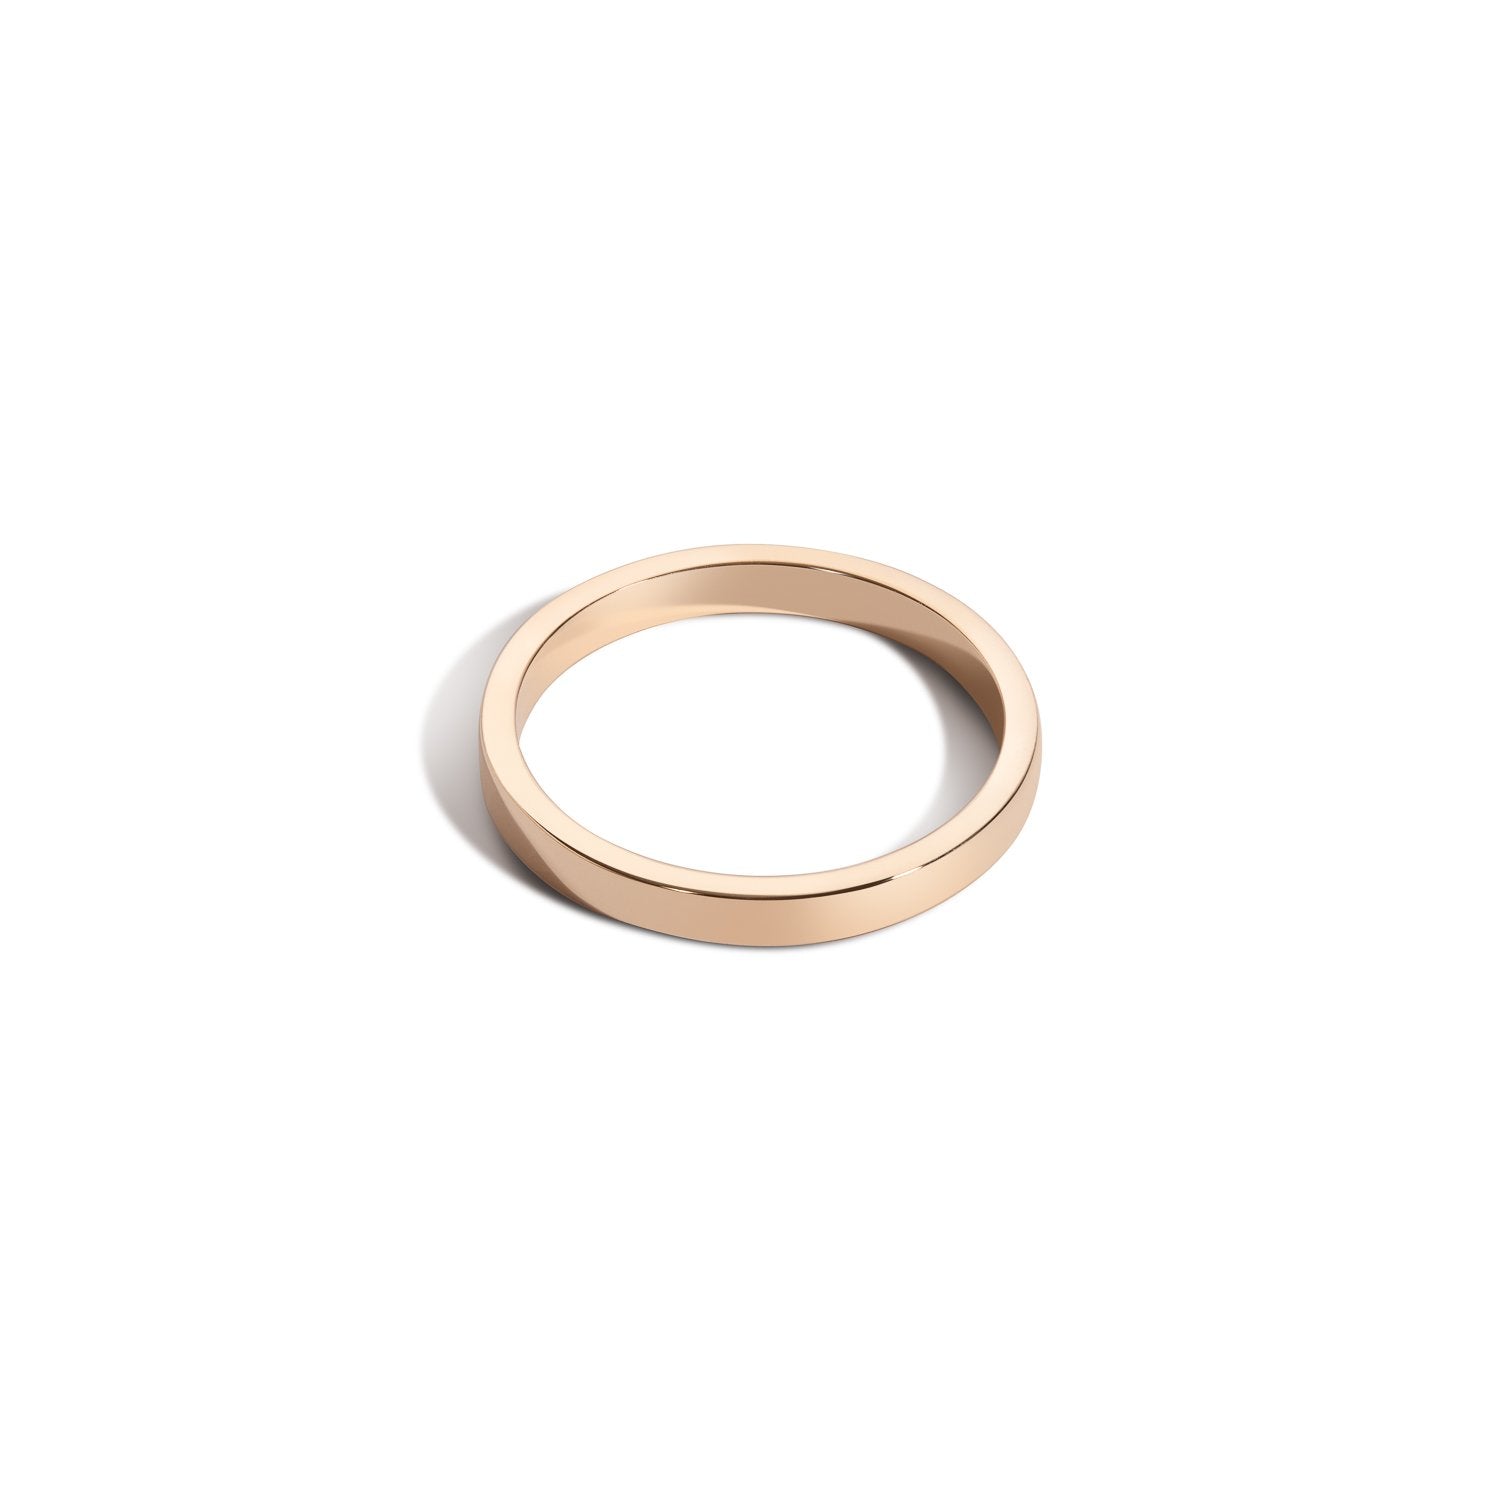 IN STOCK 14K Yellow Gold 2.2mm Deep Gold Band - Size 6